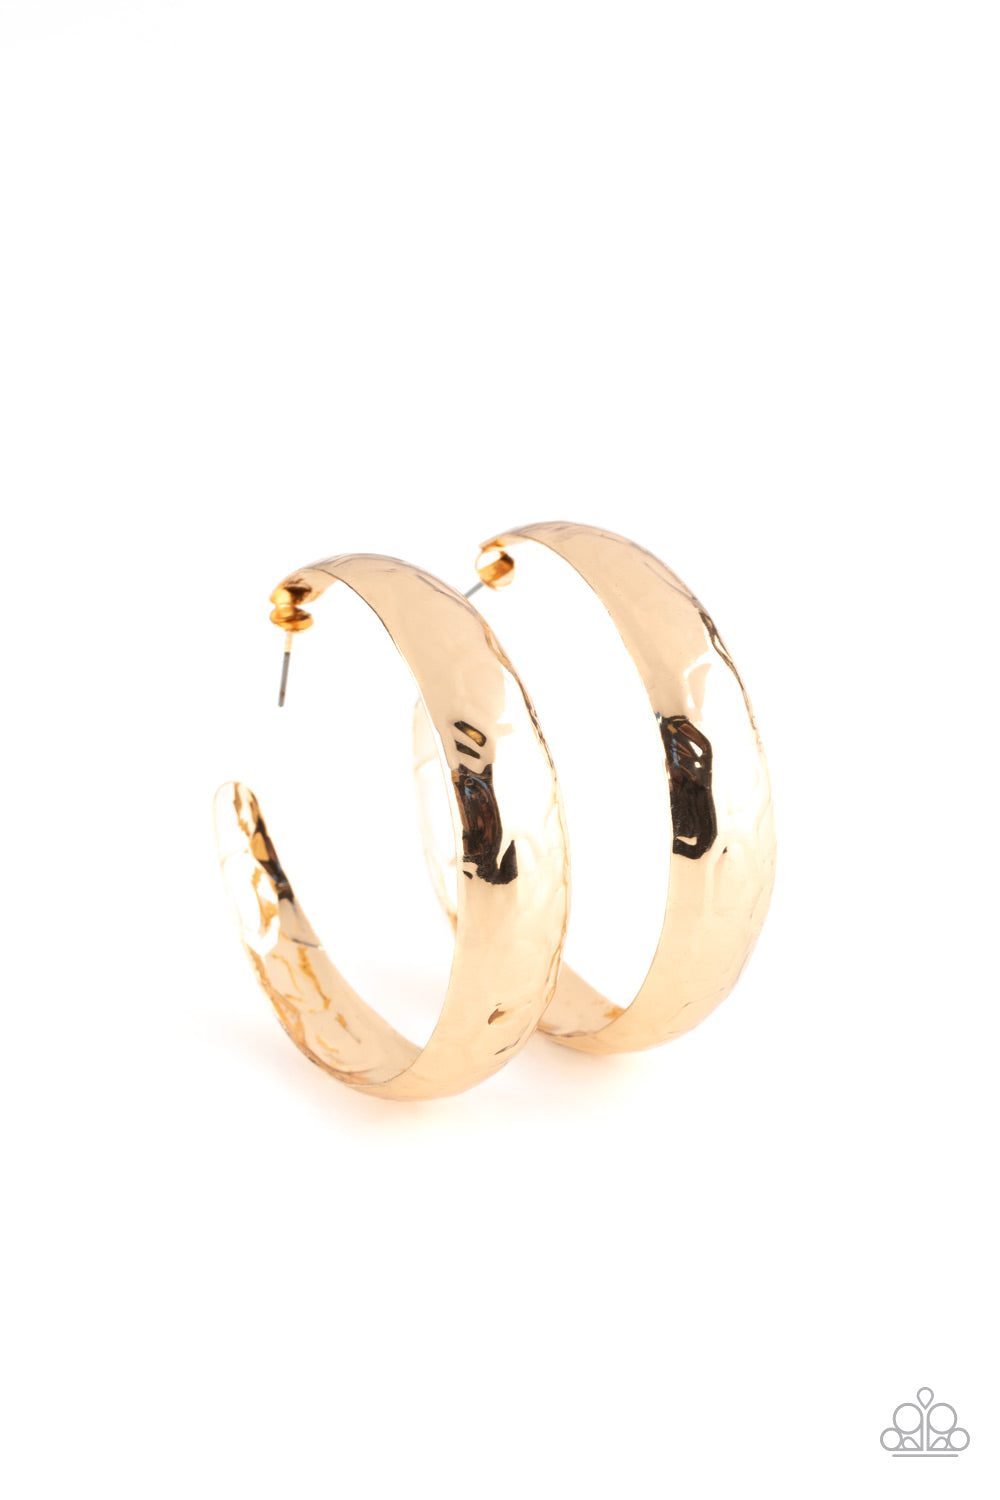 Paparazzi Accessories -Hammered in blinding shimmer, a thick gold hoop curls into a gritty-glamorous display for an exaggerated attitude.